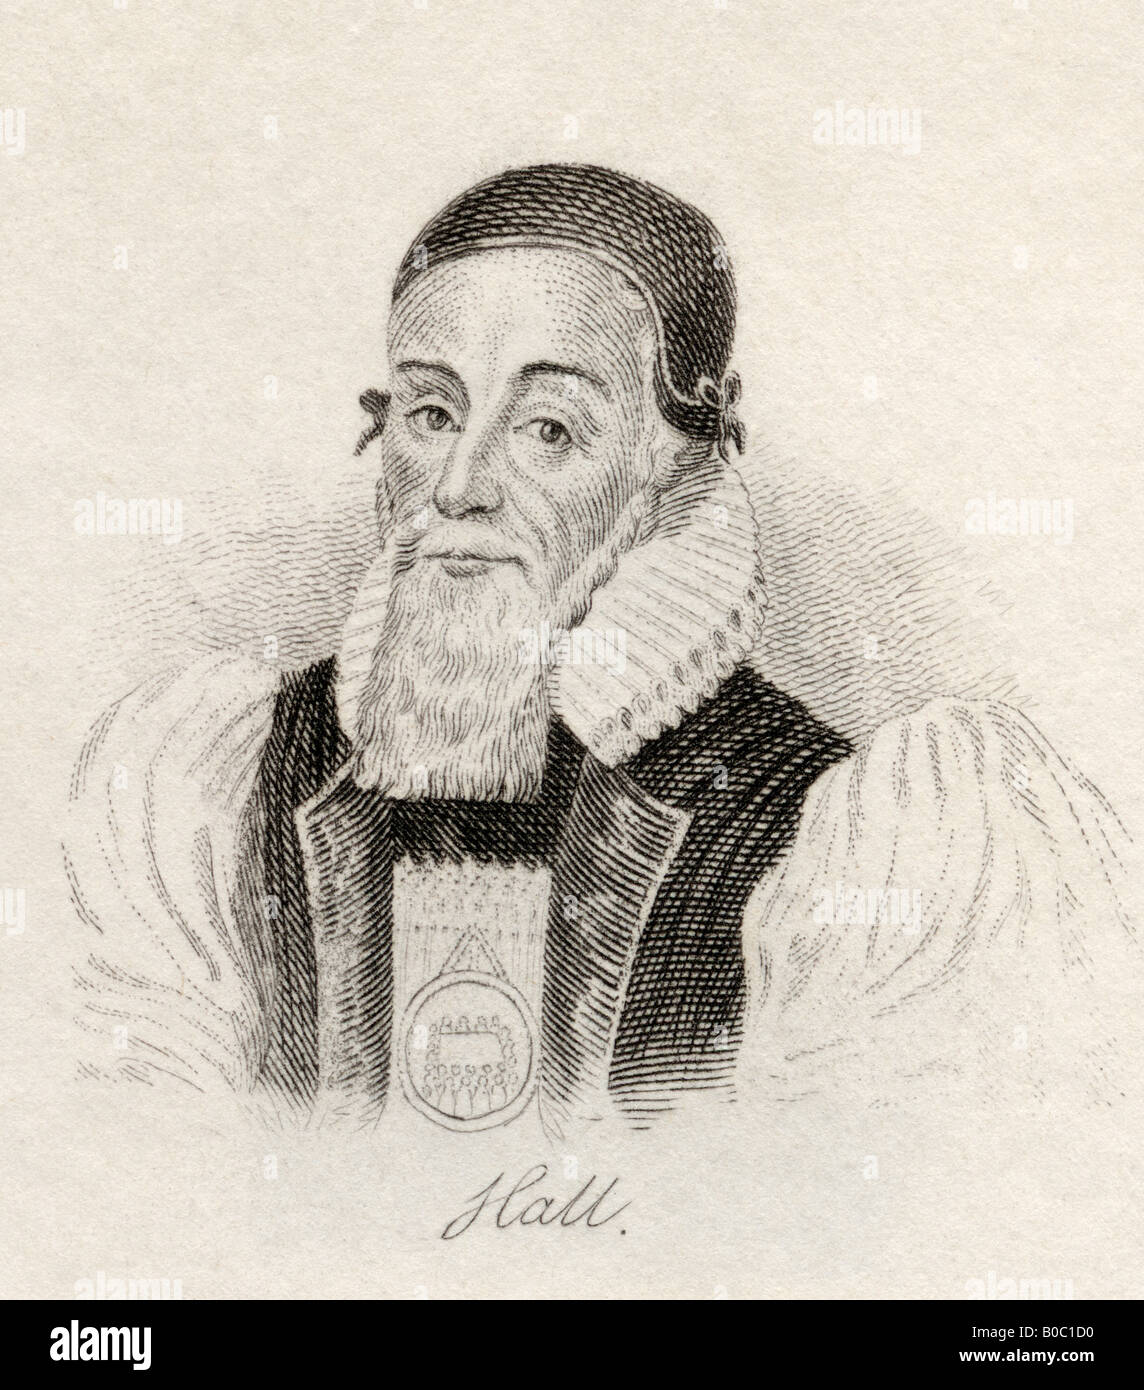 Joseph Hall, 1574 -1656. English bishop and satirist. From the book Crabbs Historical Dictionary, published 1825. Stock Photo